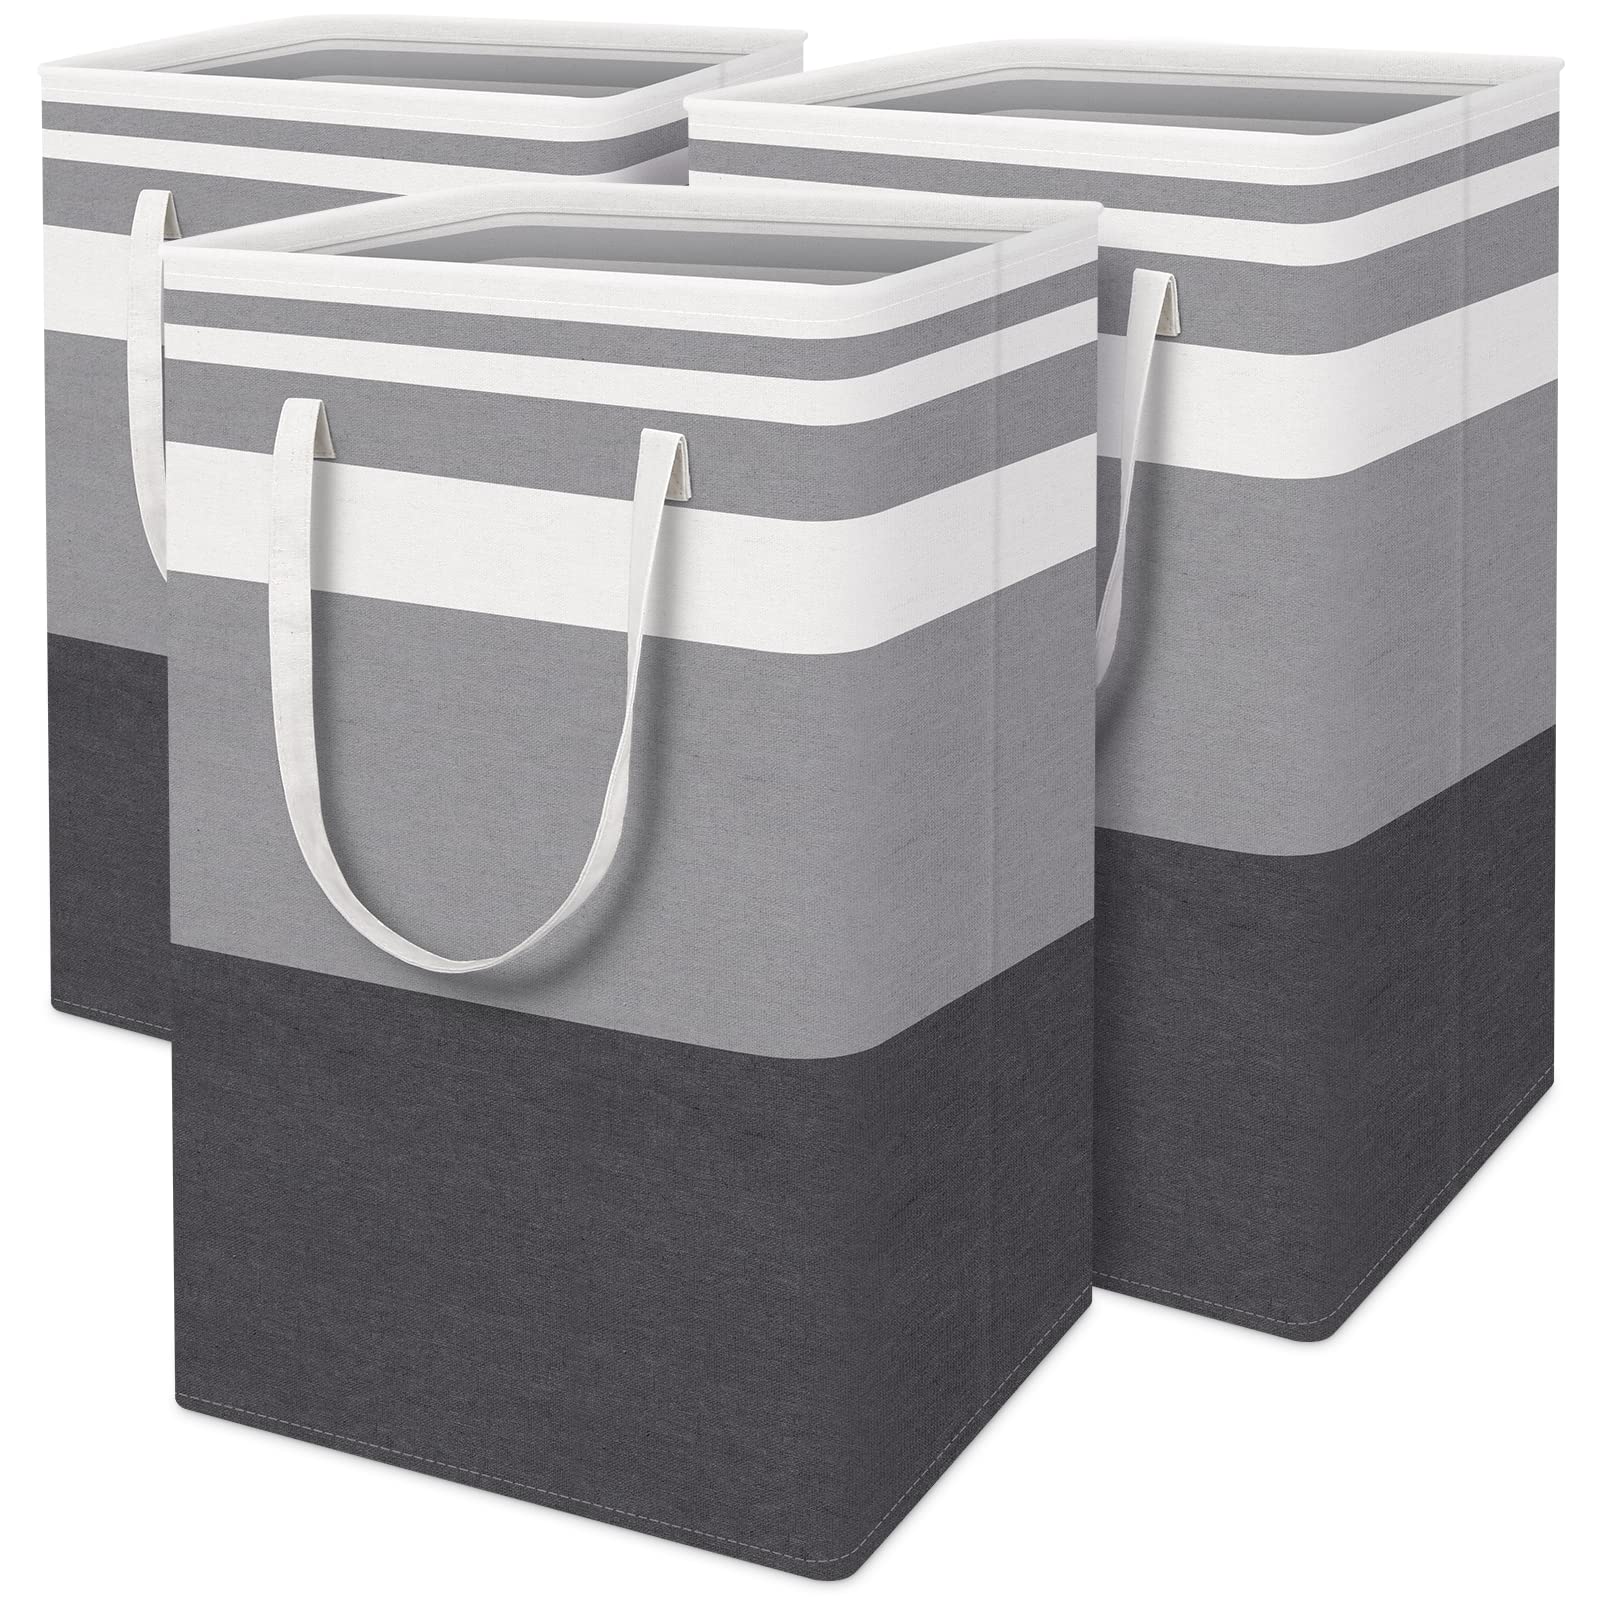 3-Pack Bliss Totes Collapsible Laundry Baskets (75L) $16 + Free Shipping w/ Prime